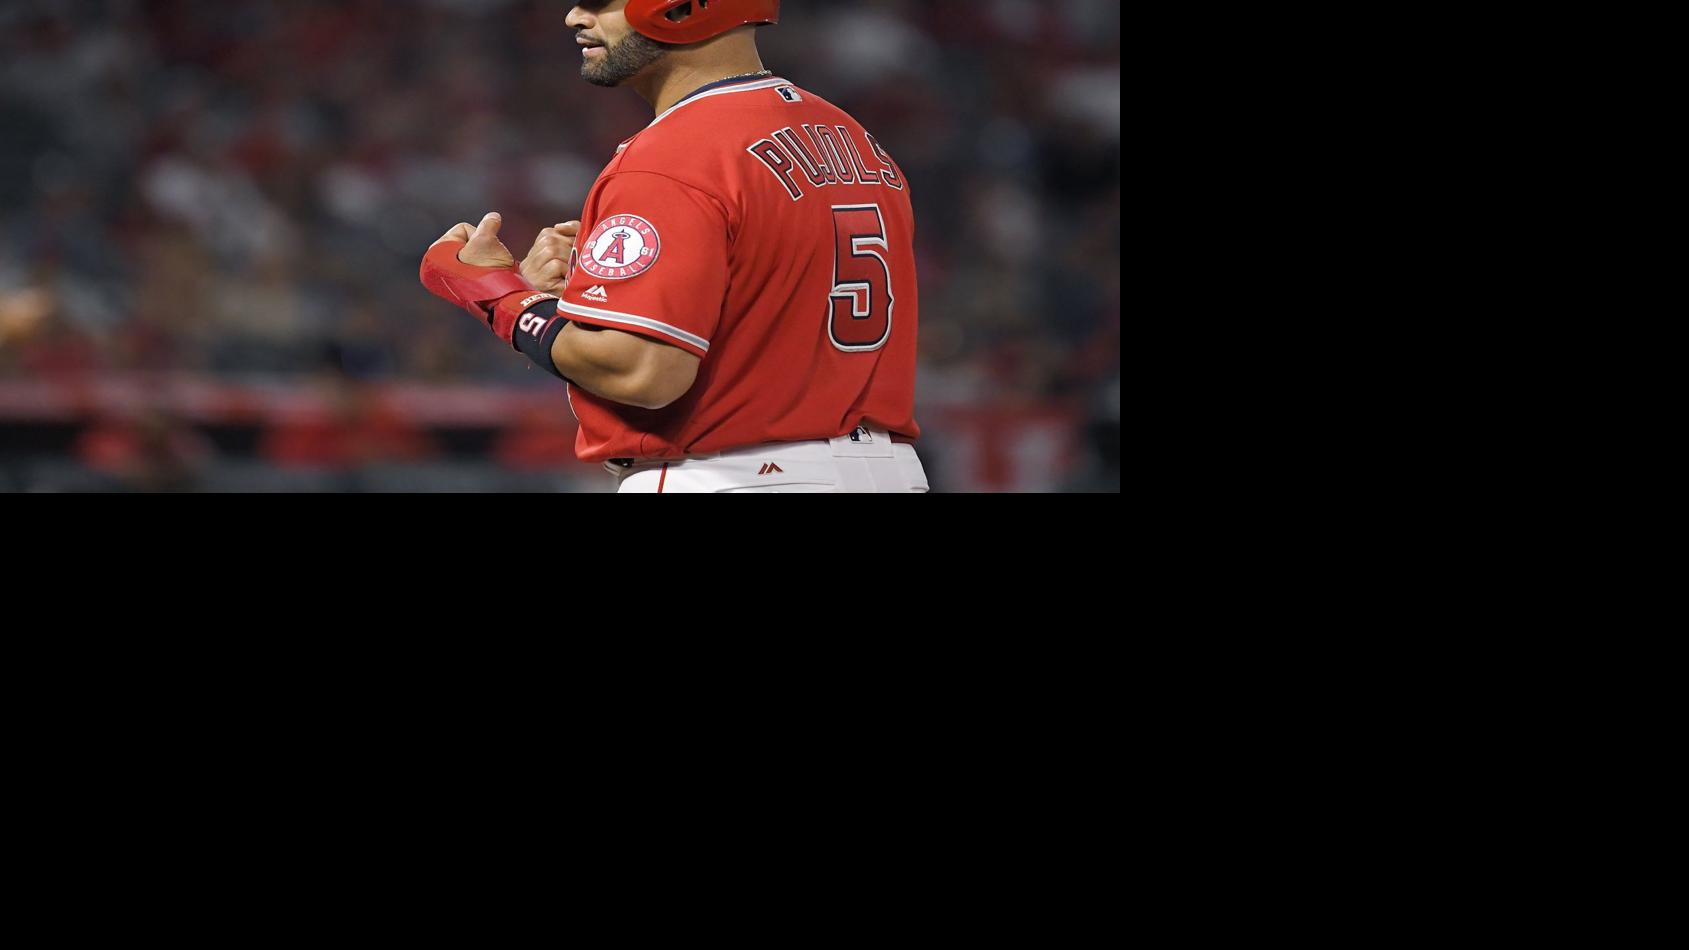 Pujols visit highlights 2019 Cards schedule; season opens March 28 | St. Louis Cardinals ...